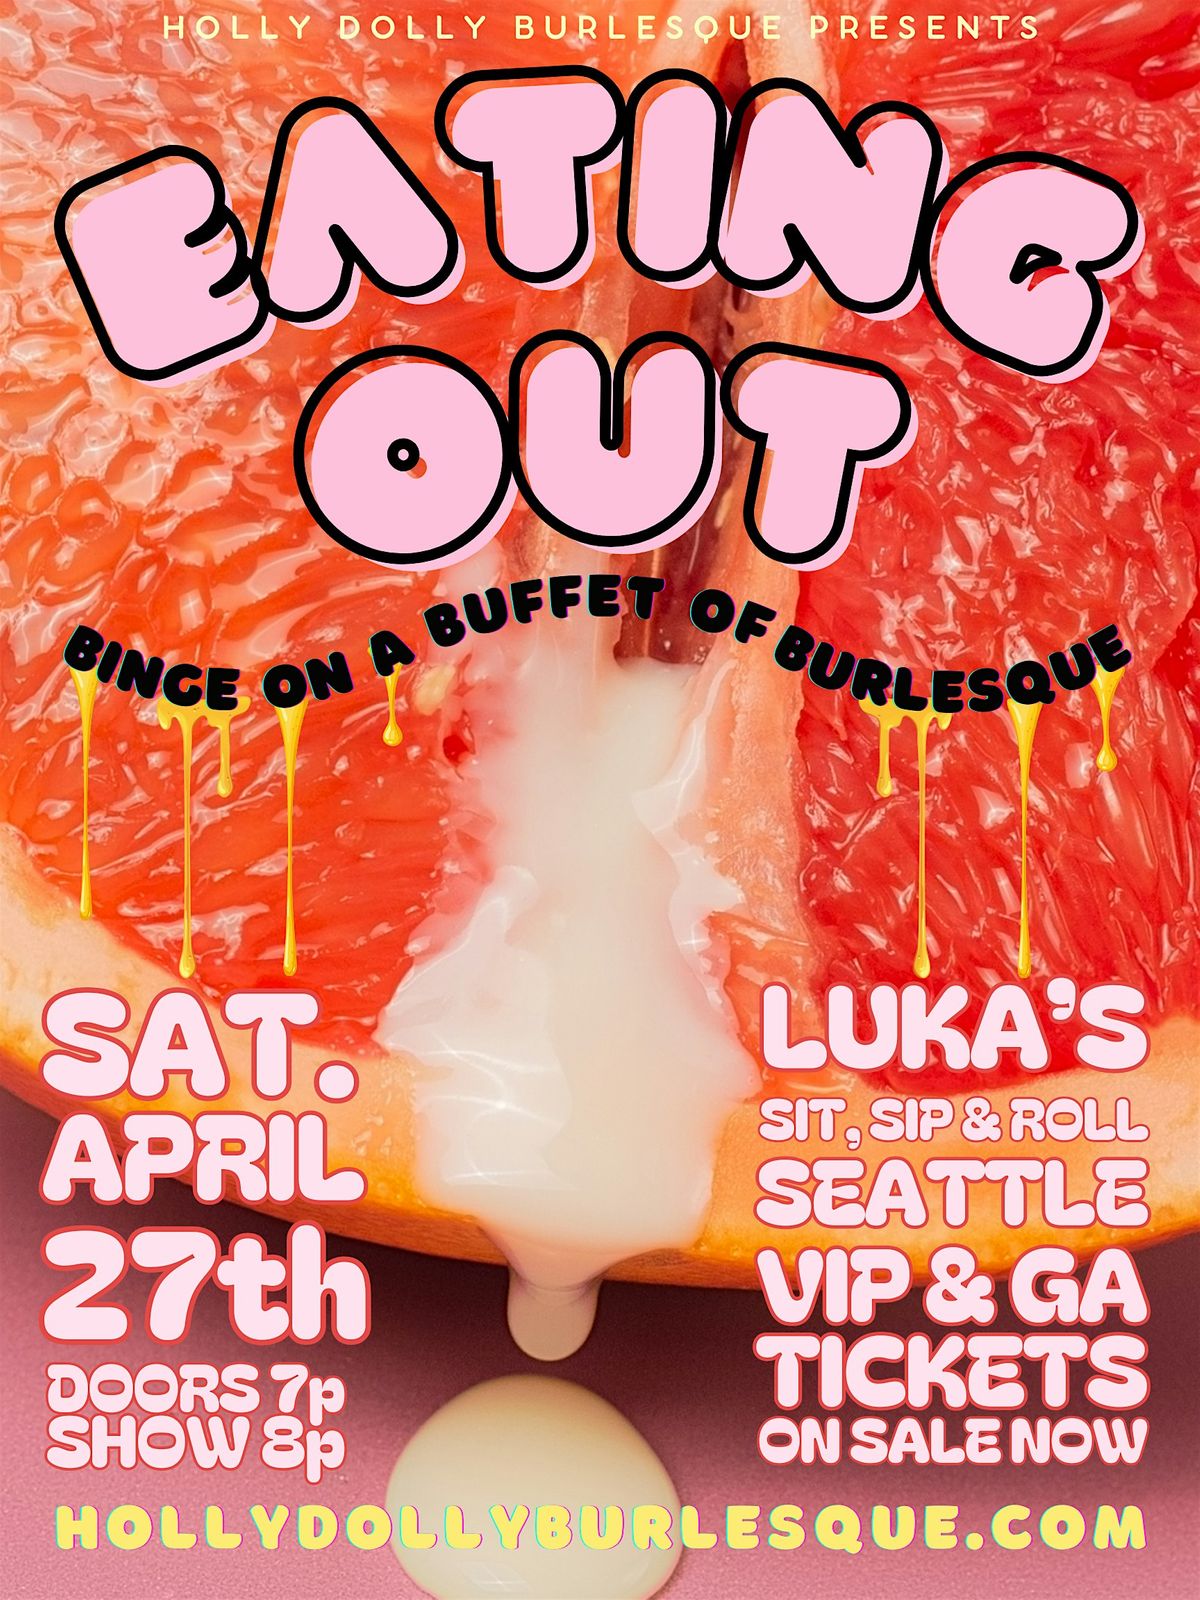 EATING OUT: Binge on a Buffet of Burlesque!